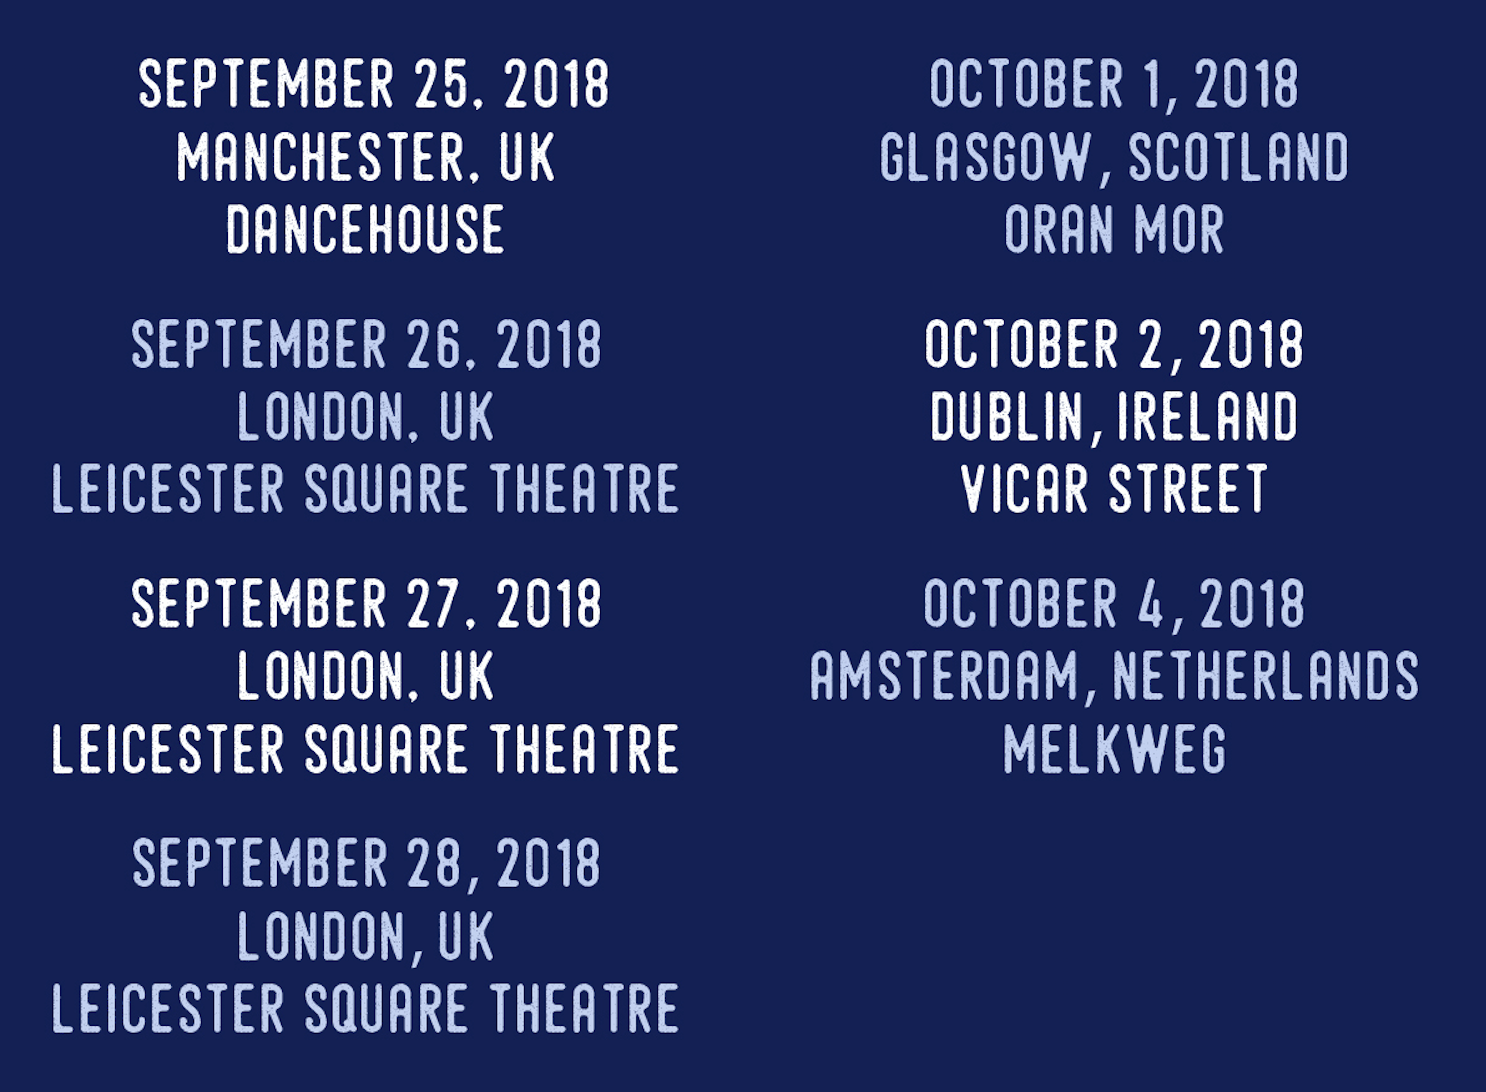 OH COME ON European Tour Dates Announced (August 23, 2018)